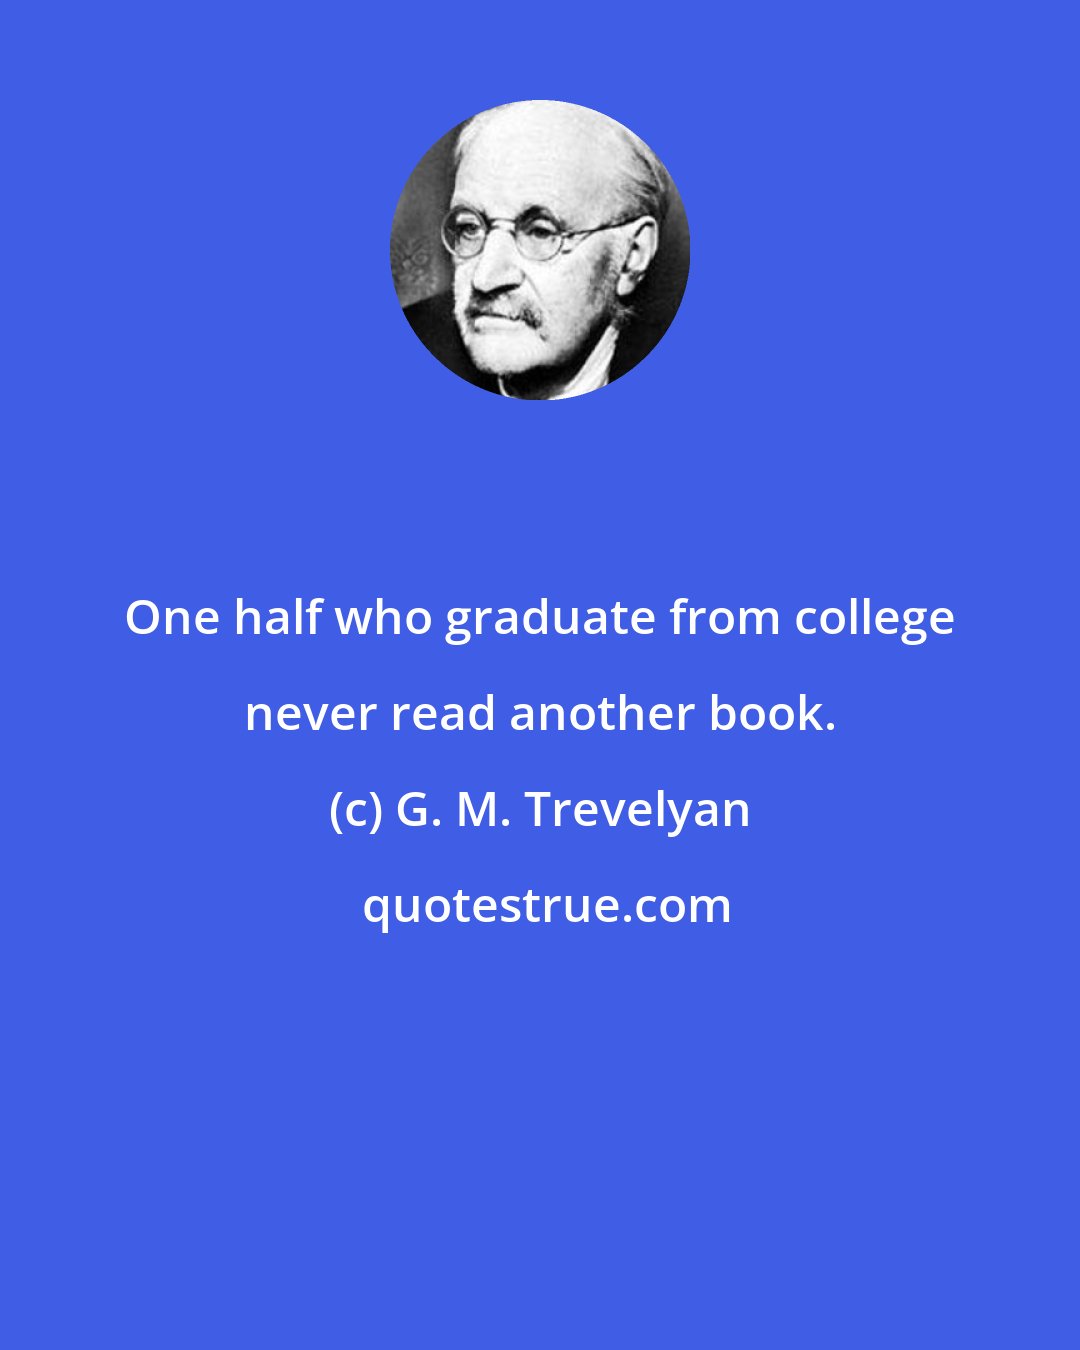 G. M. Trevelyan: One half who graduate from college never read another book.